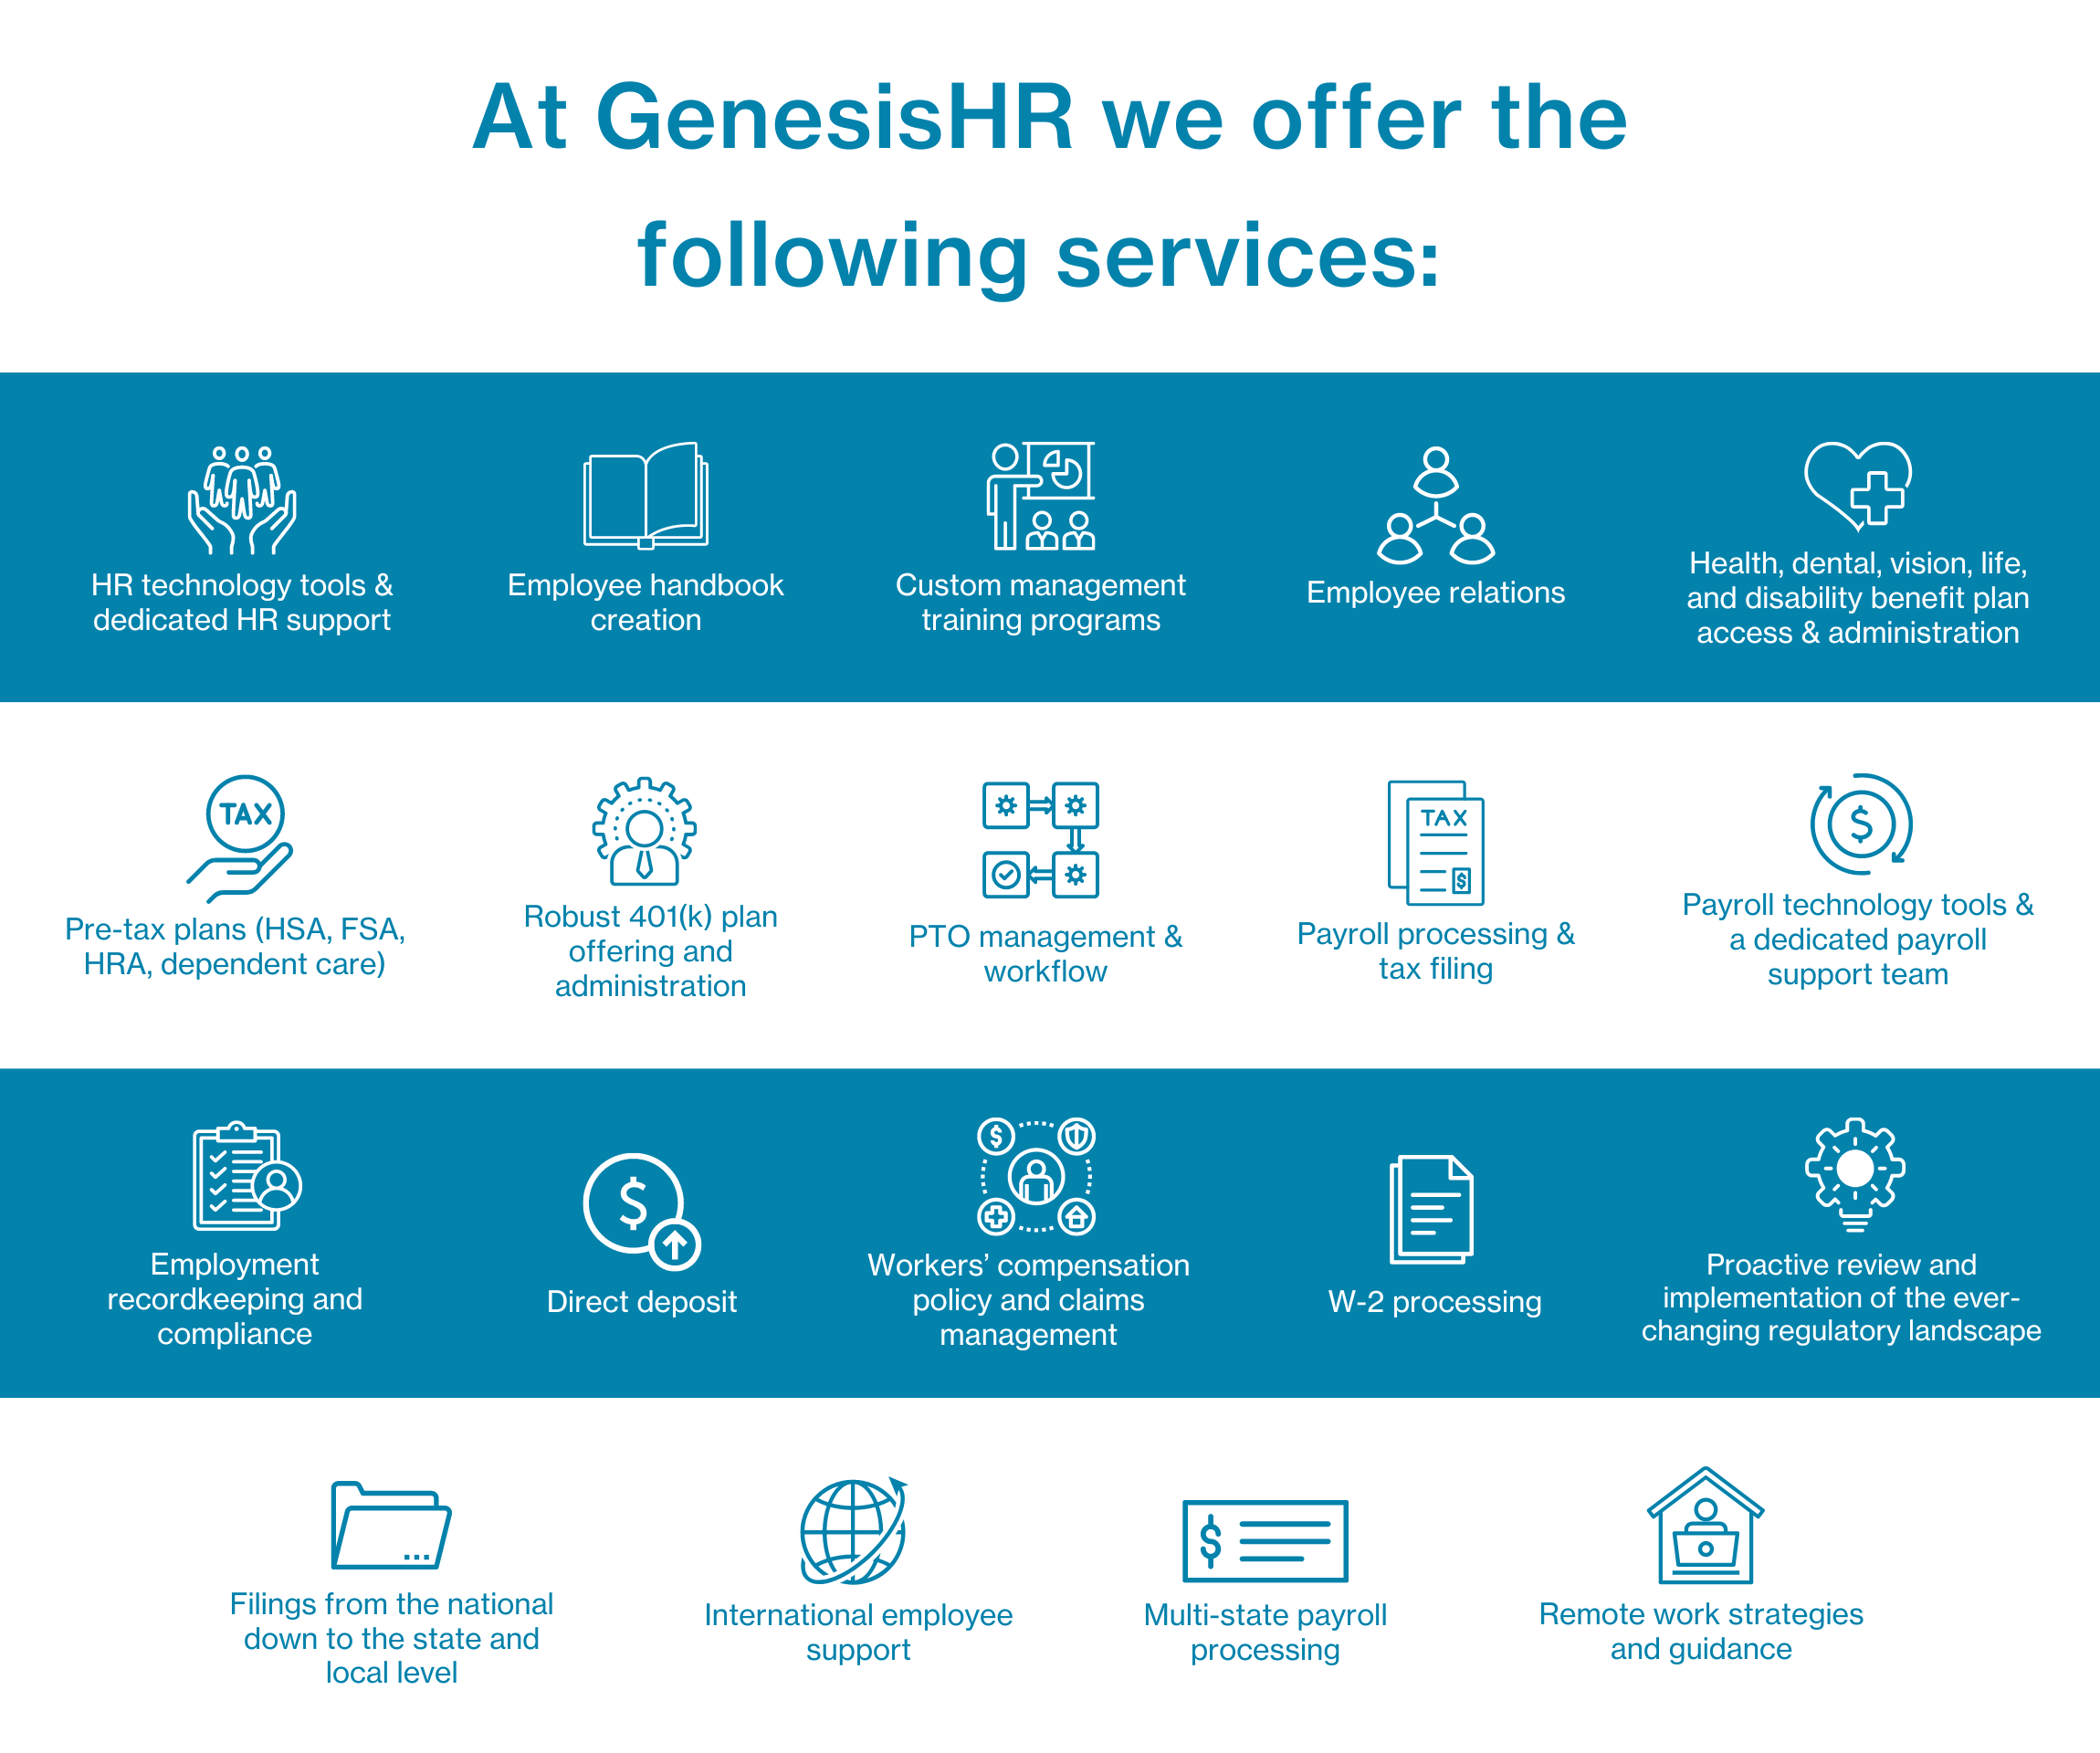 At GenesisHR we offer the following PEO services